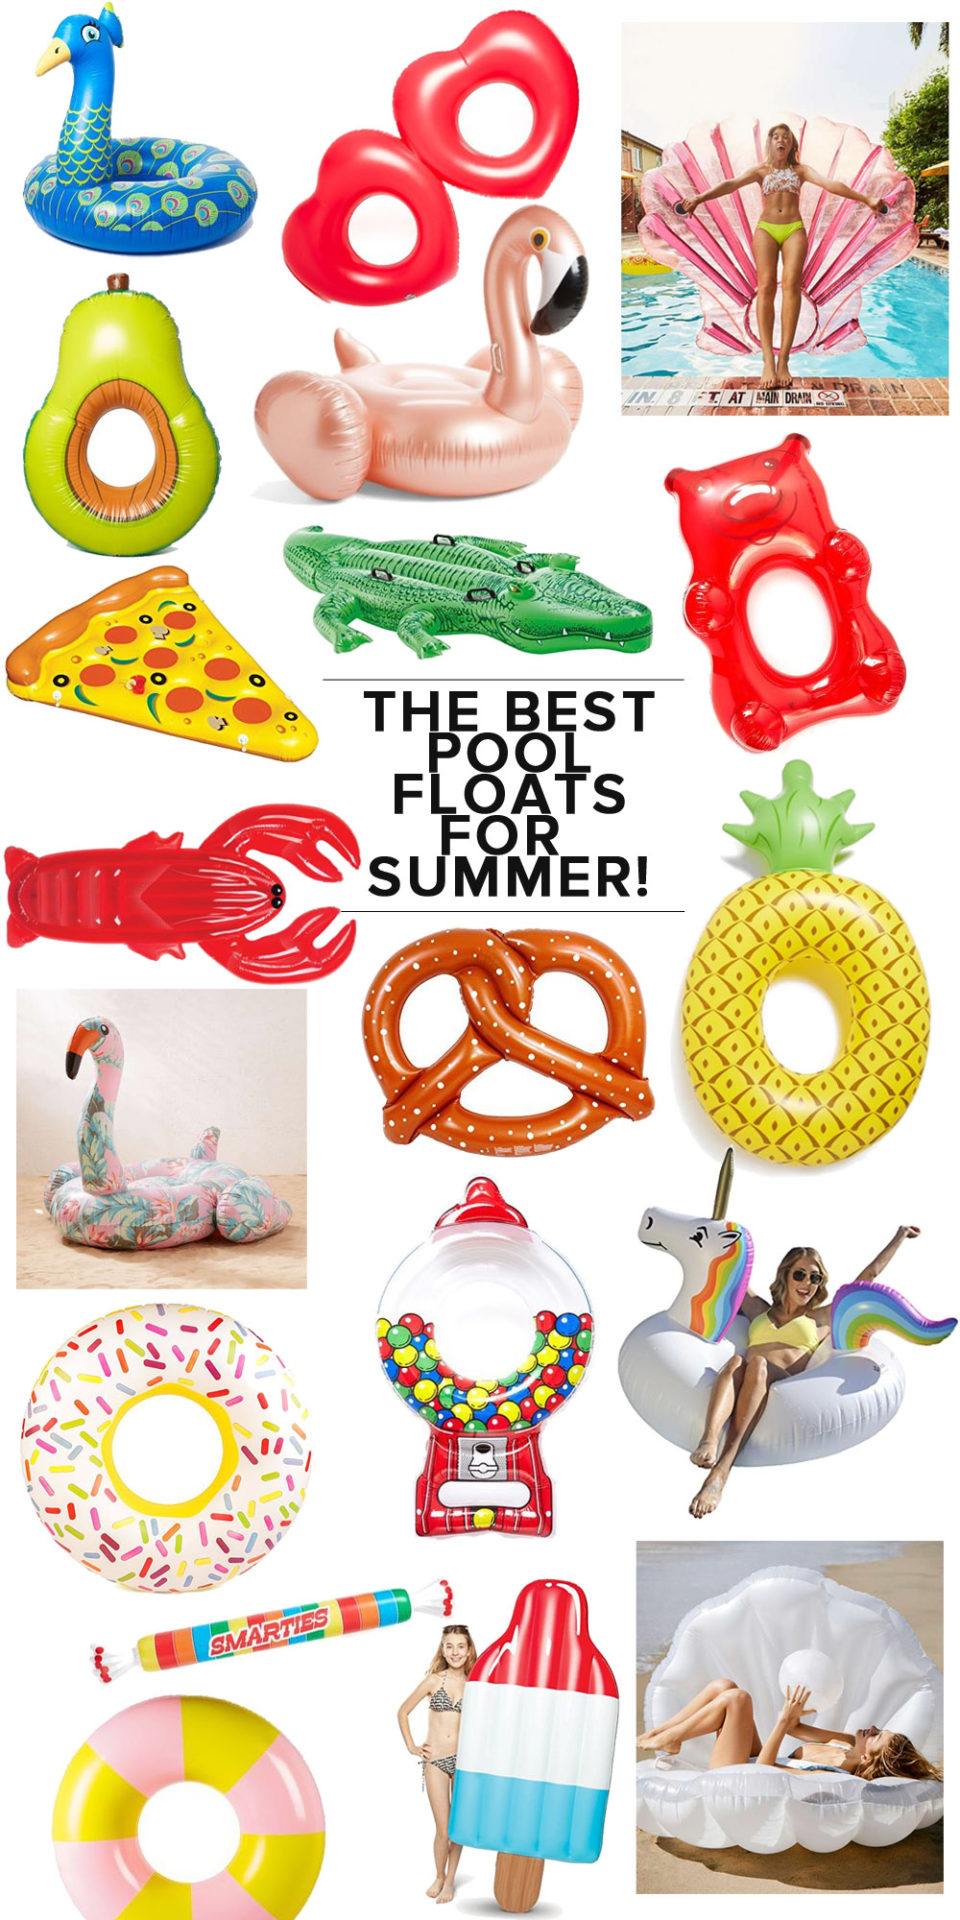 The Best Pool Floats for Summer (for Adults!) // the modern savvy